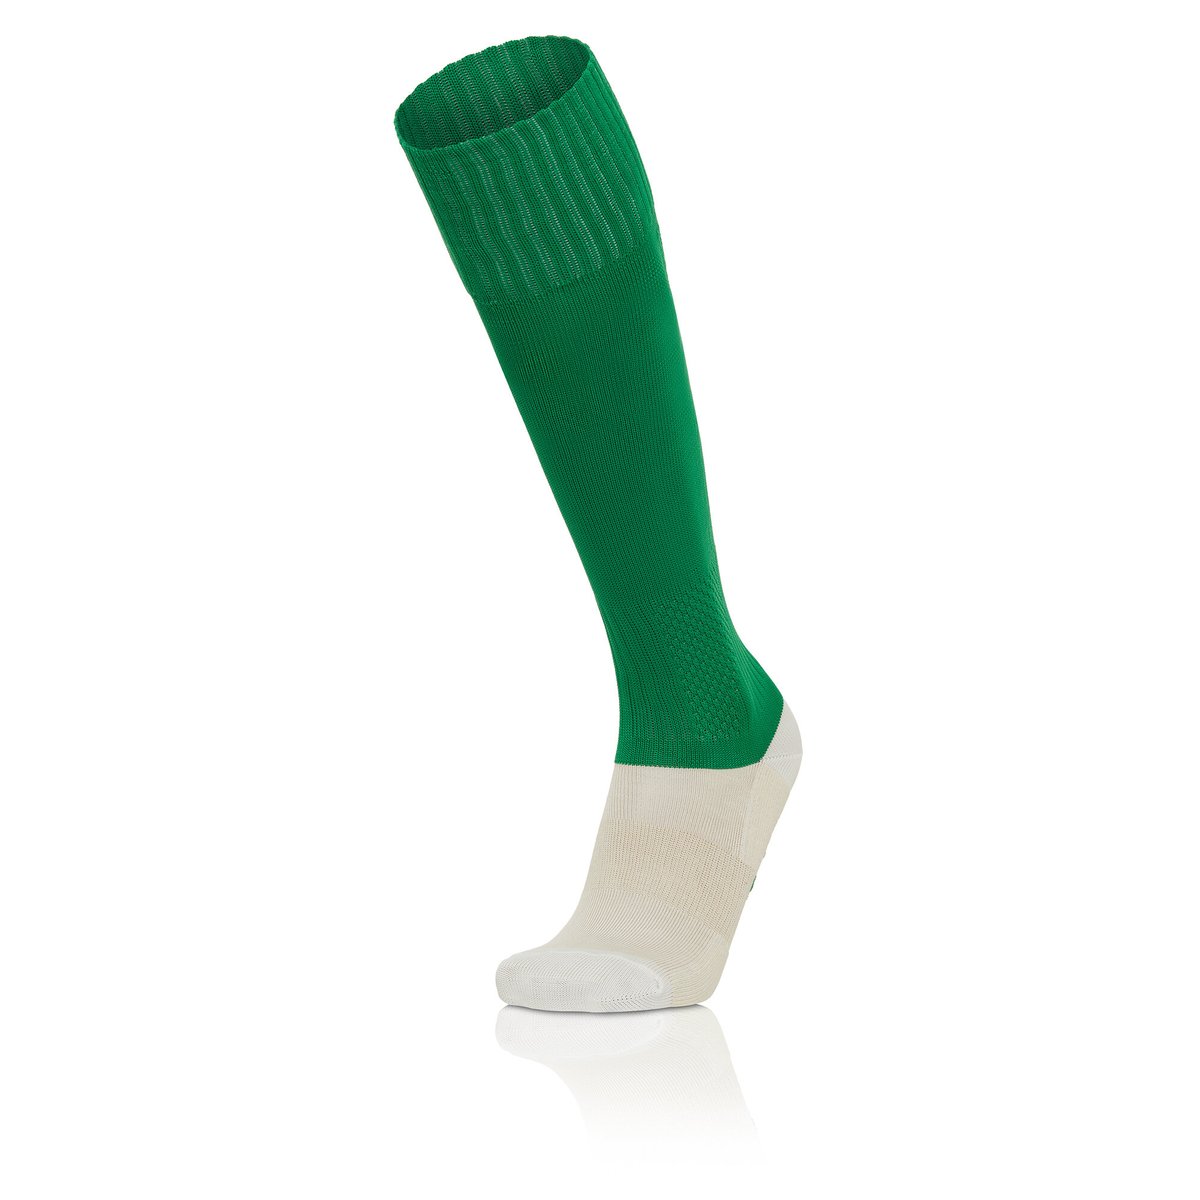 Macron Round Match Sock - Green (Pack of 5)